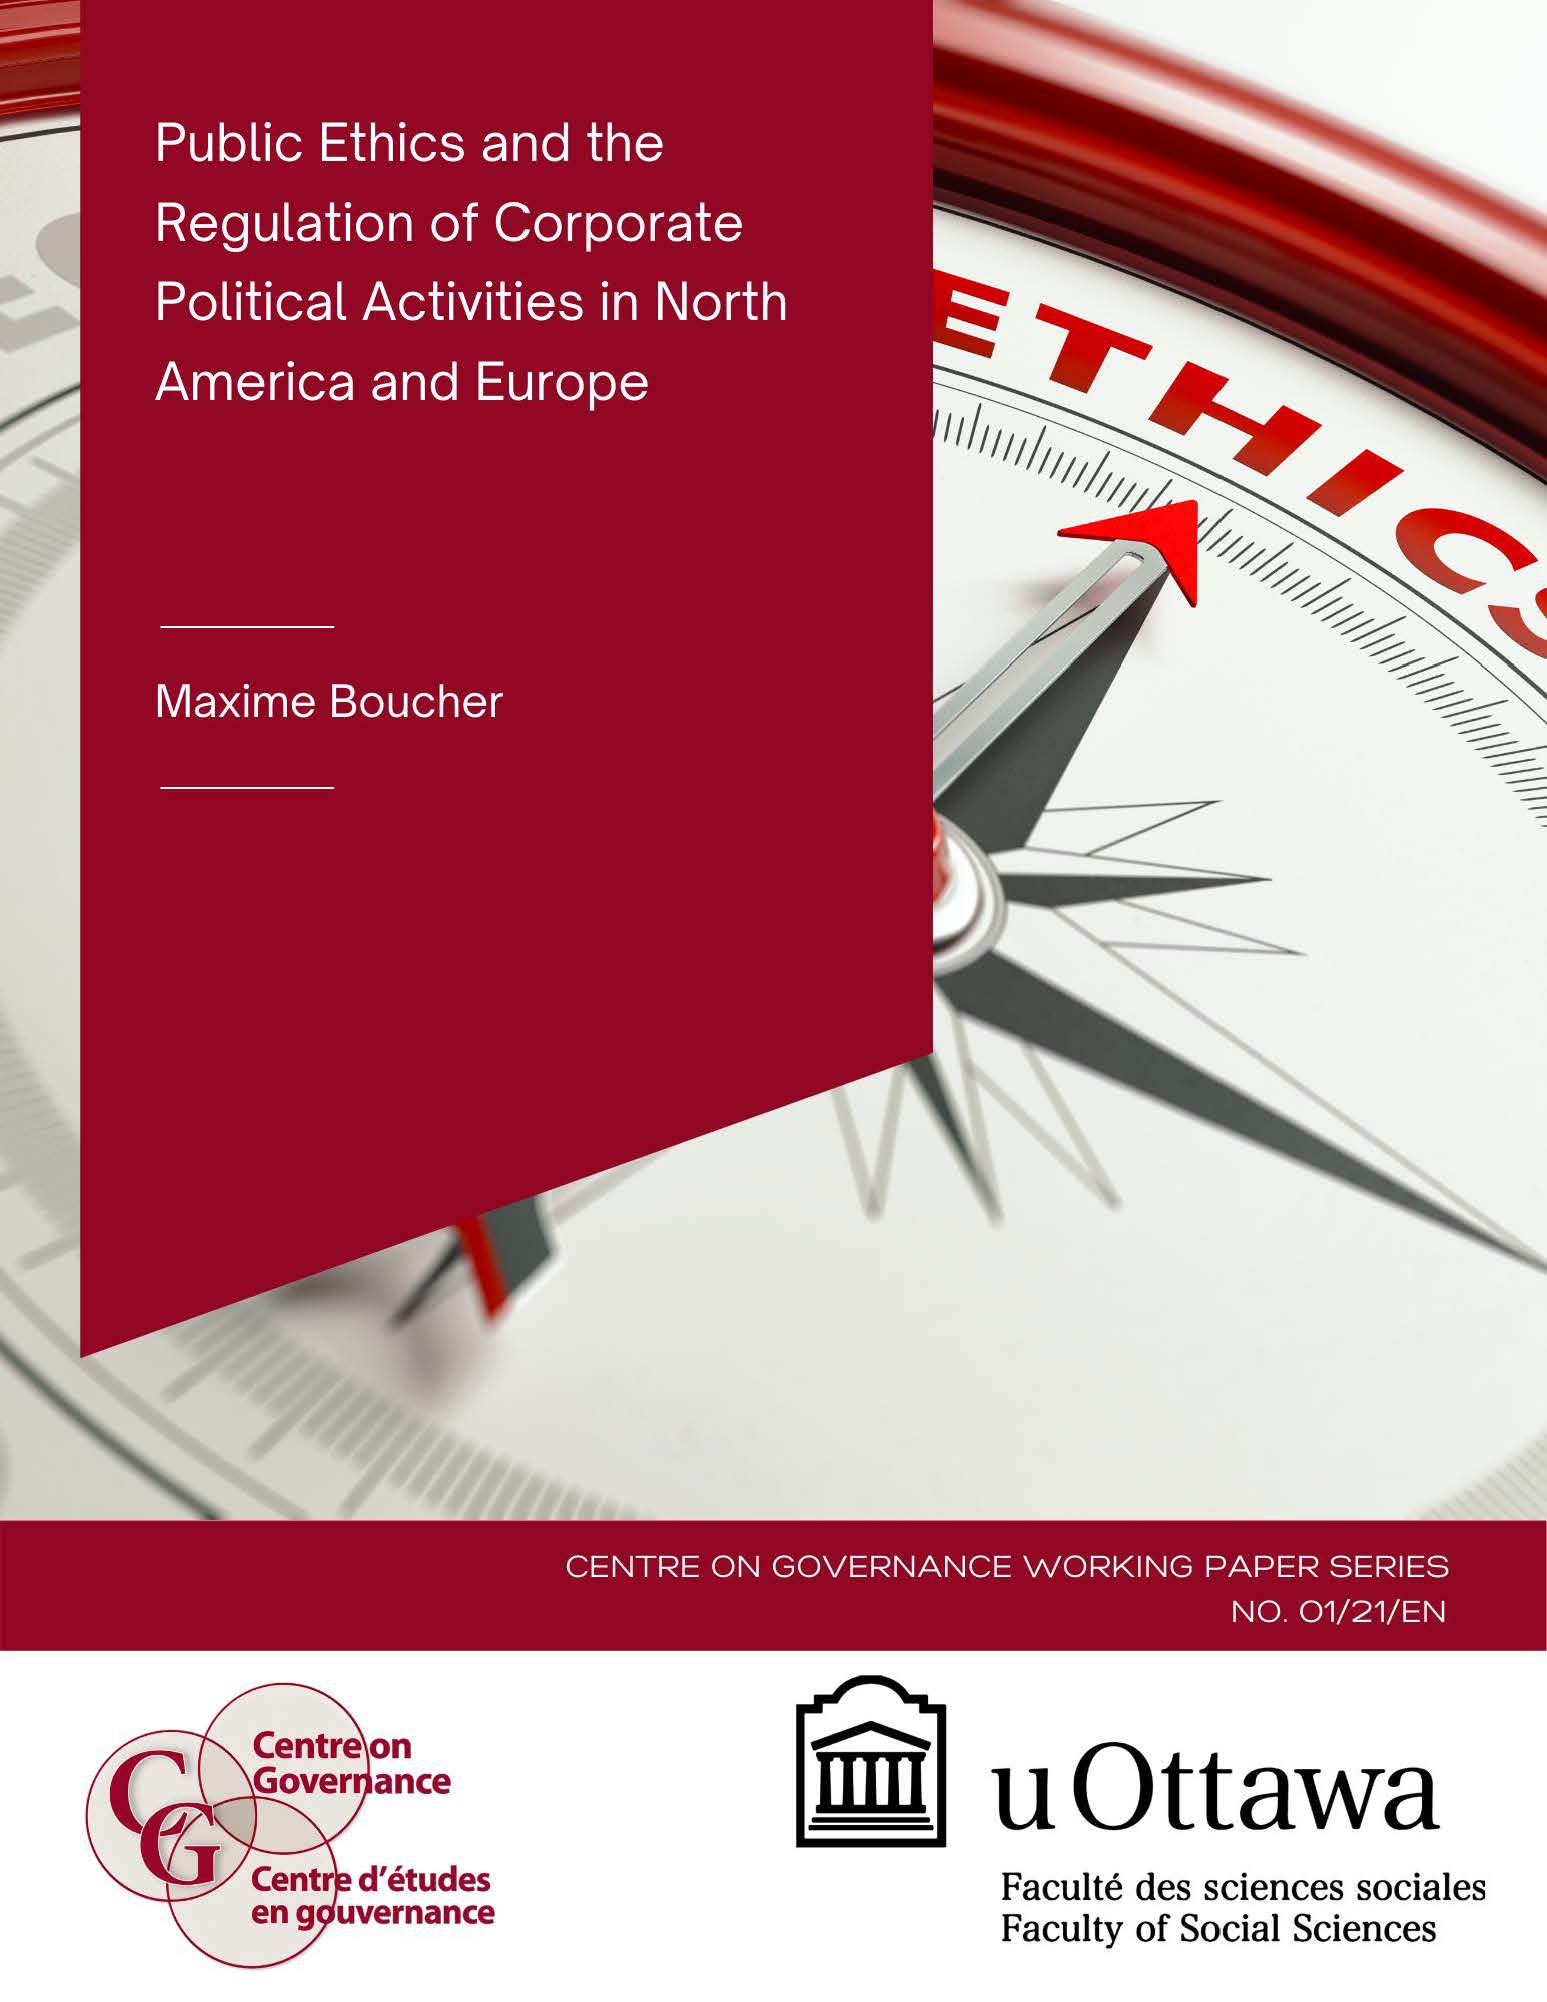 Public Ethics and the Regulation of Corporate Political Activities in North America and Europe